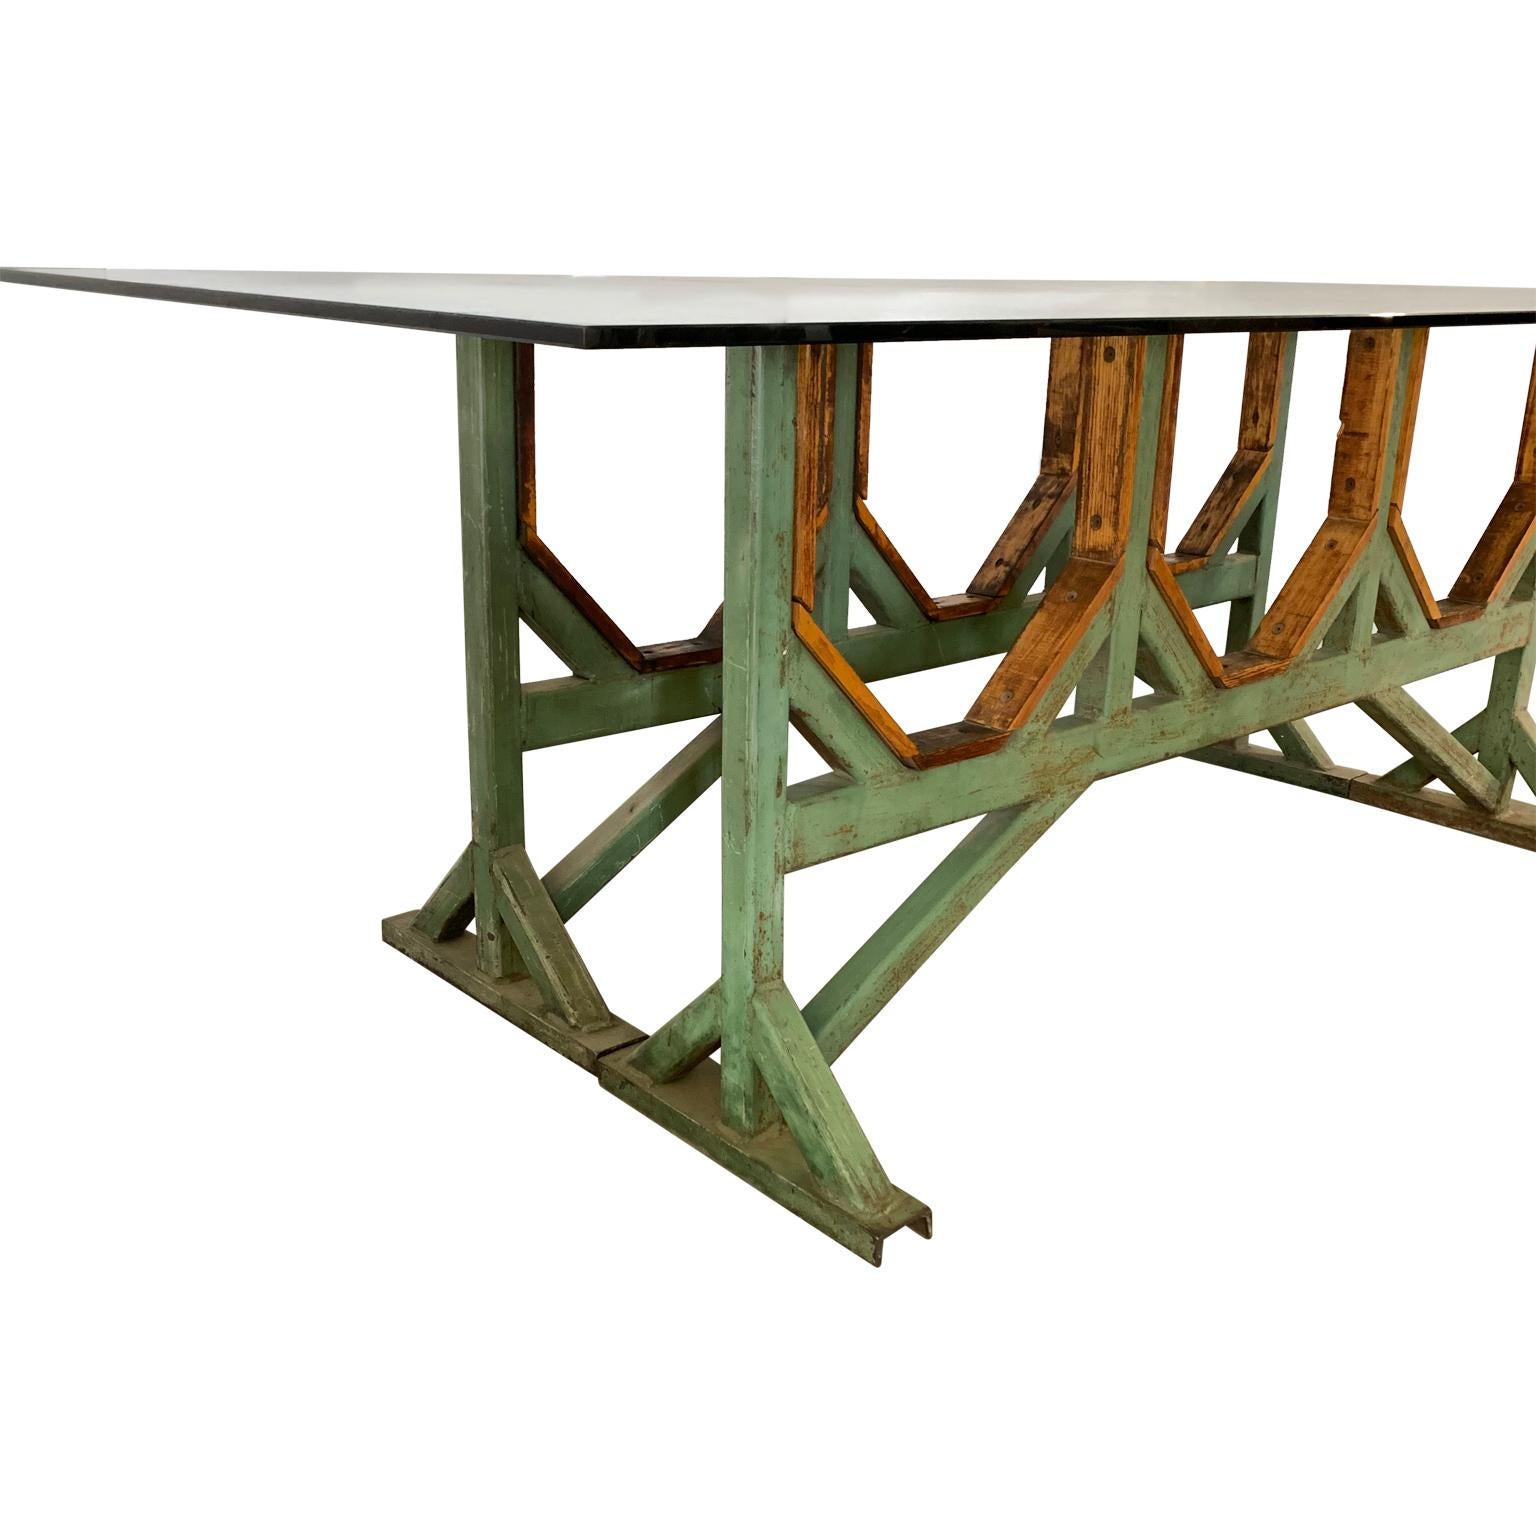 Hand-Crafted Two Customizable Industrial Metal And Wood Dining Room Table Bases For Sale